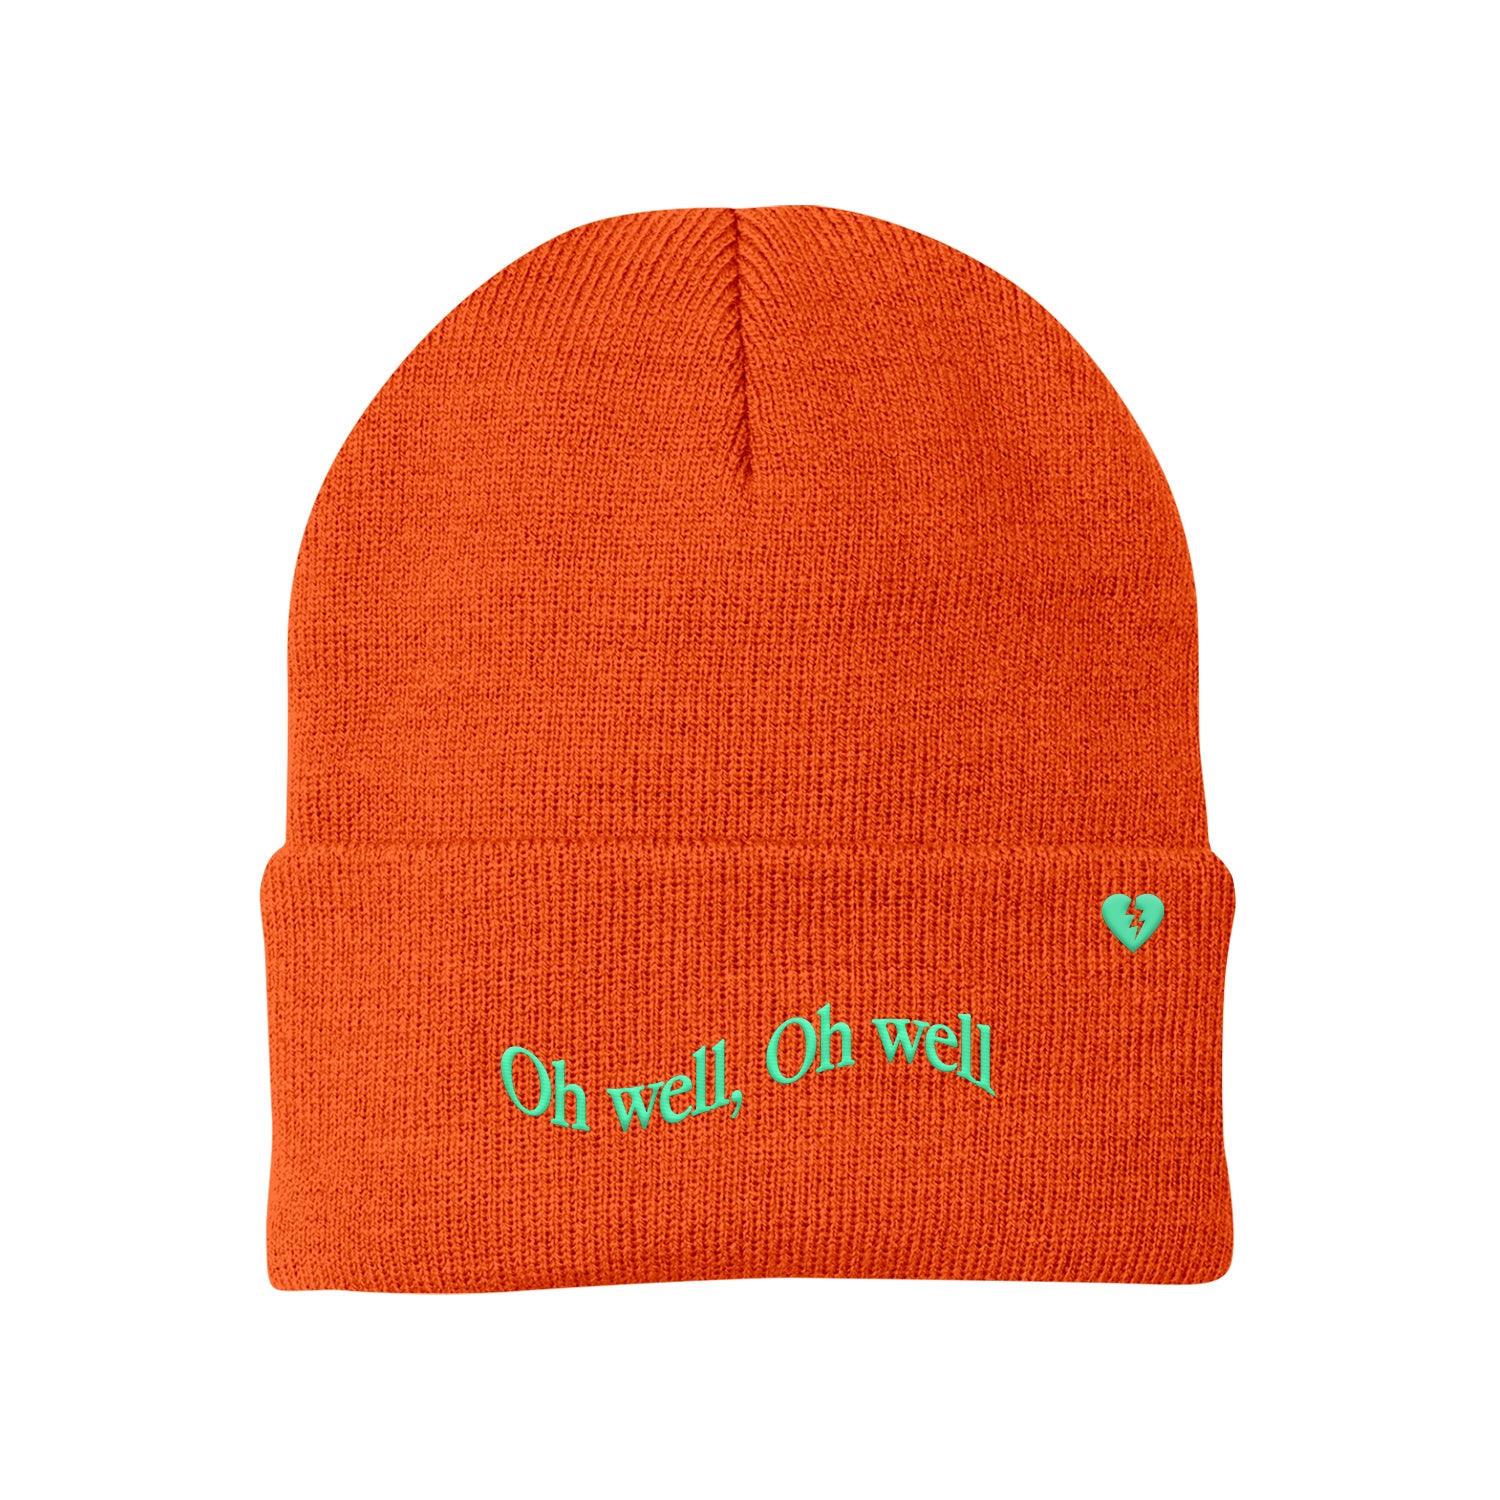 image of an orange winter beanie on a white background. front of the beanie has light green embroidery on the cuff that says oh well, oh well and a small broken heart